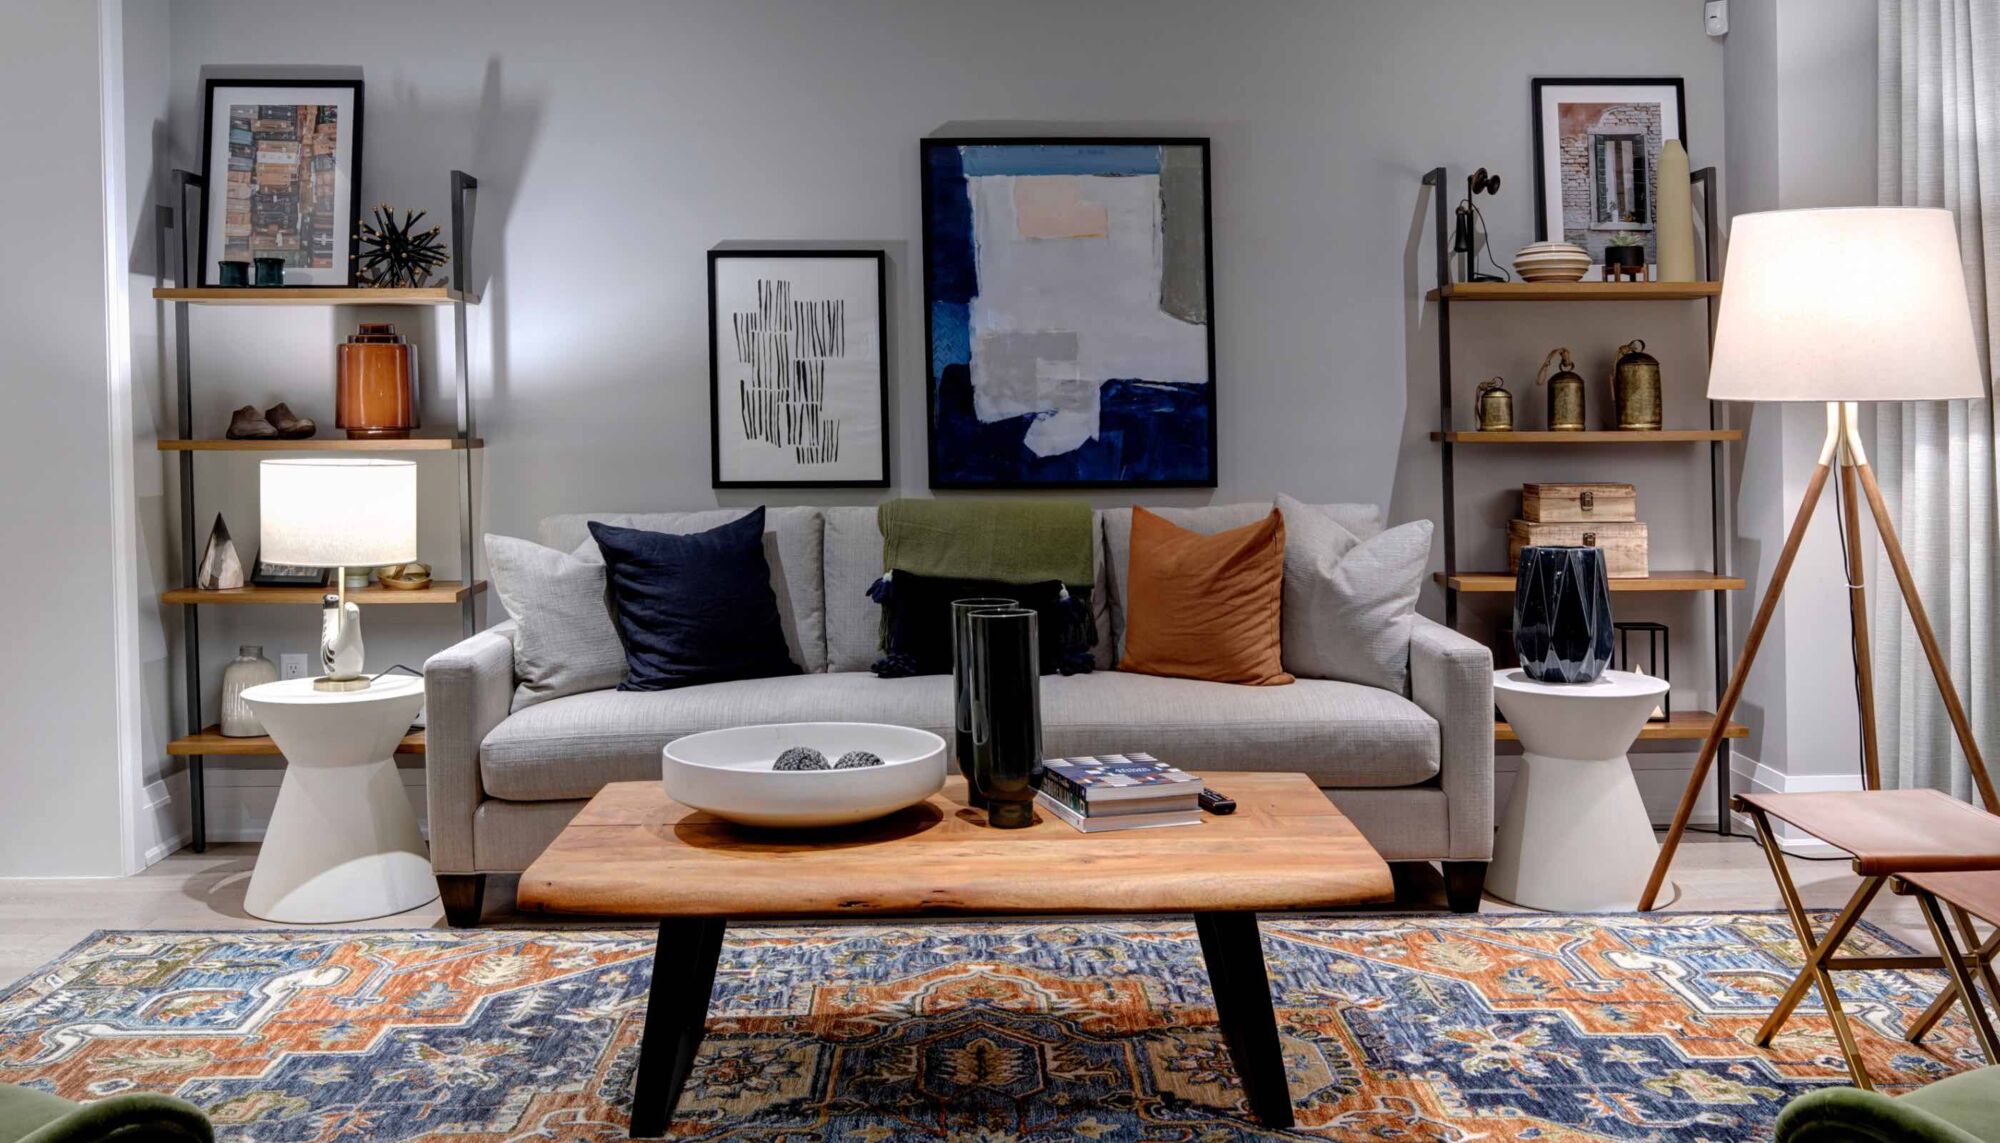 Living room with a grey couch, blue and orange pillows, and a blue and orange rug.